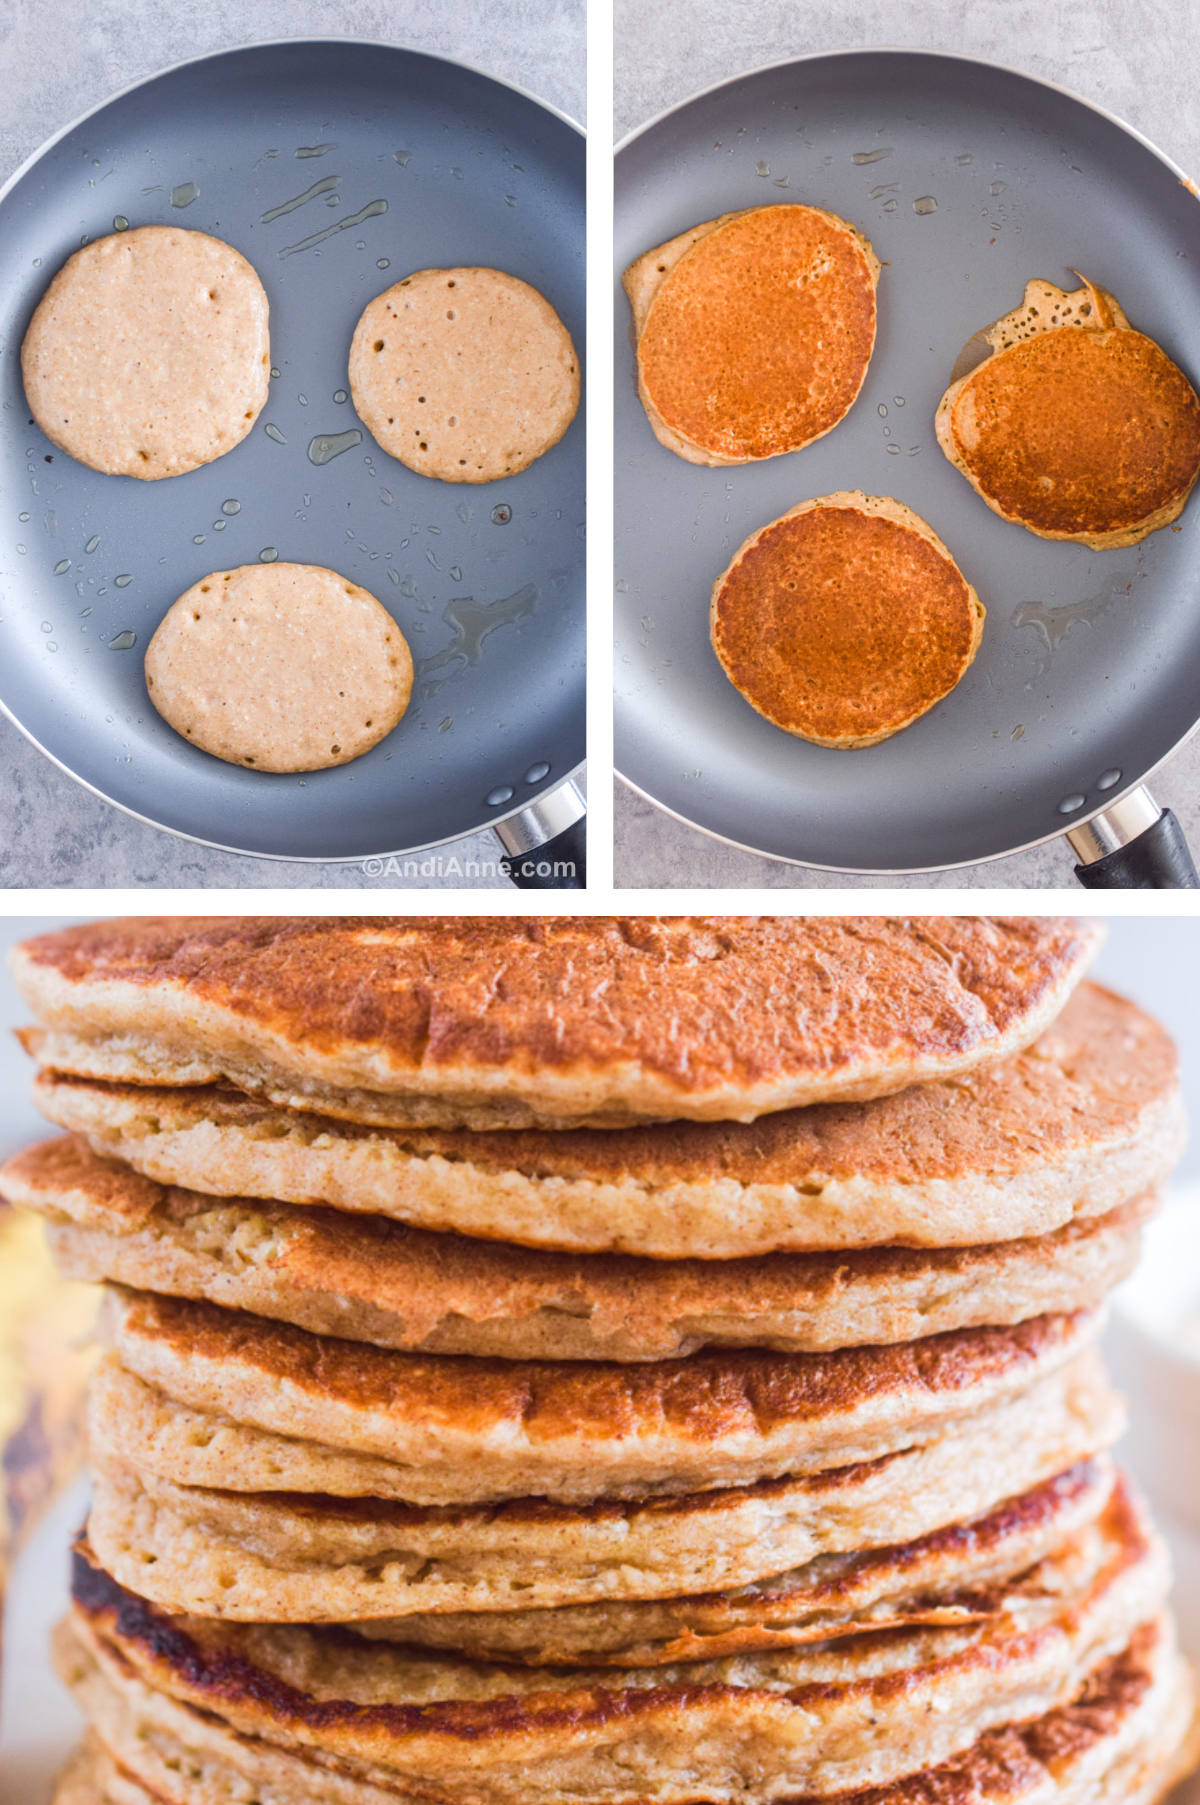 Three images in one: 1. Overhead view of pancakes half cooked in frying pan. 2. Overhead view of cooked pancakes in frying pan. 3. Closeup of stacked pancakes. 